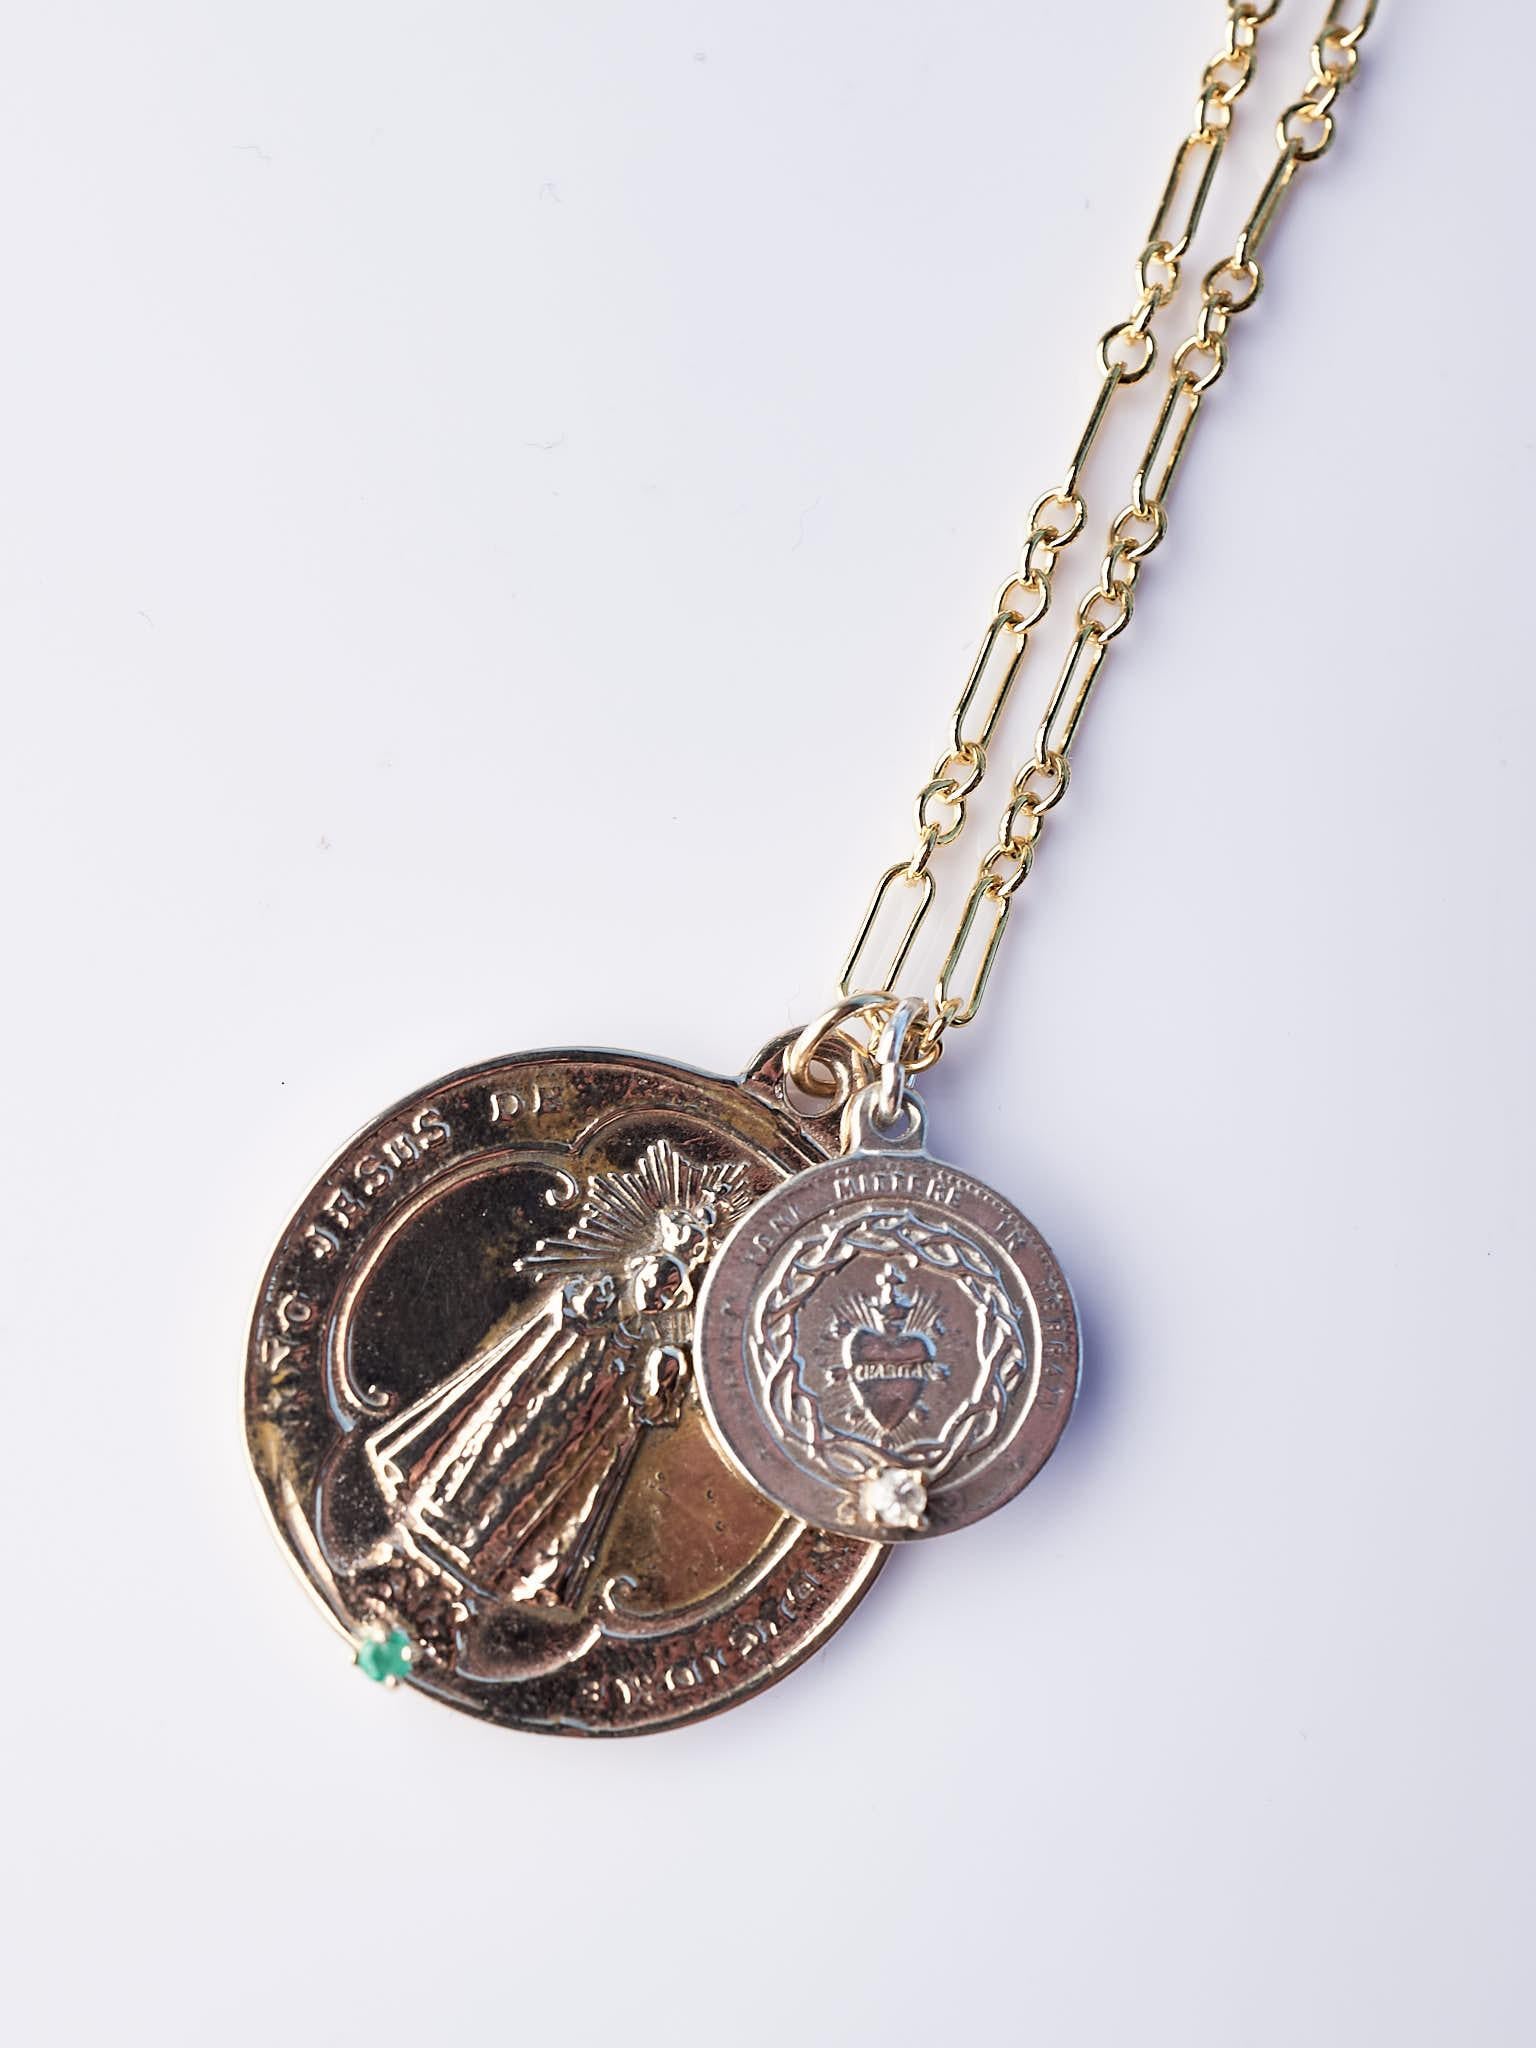 Medal Virgin Mary Medal Gold Filled Chain Necklace with Emerald set in Gold Prong and Sapphire, Silver and Bronze, Necklace can be used in different lengths  24